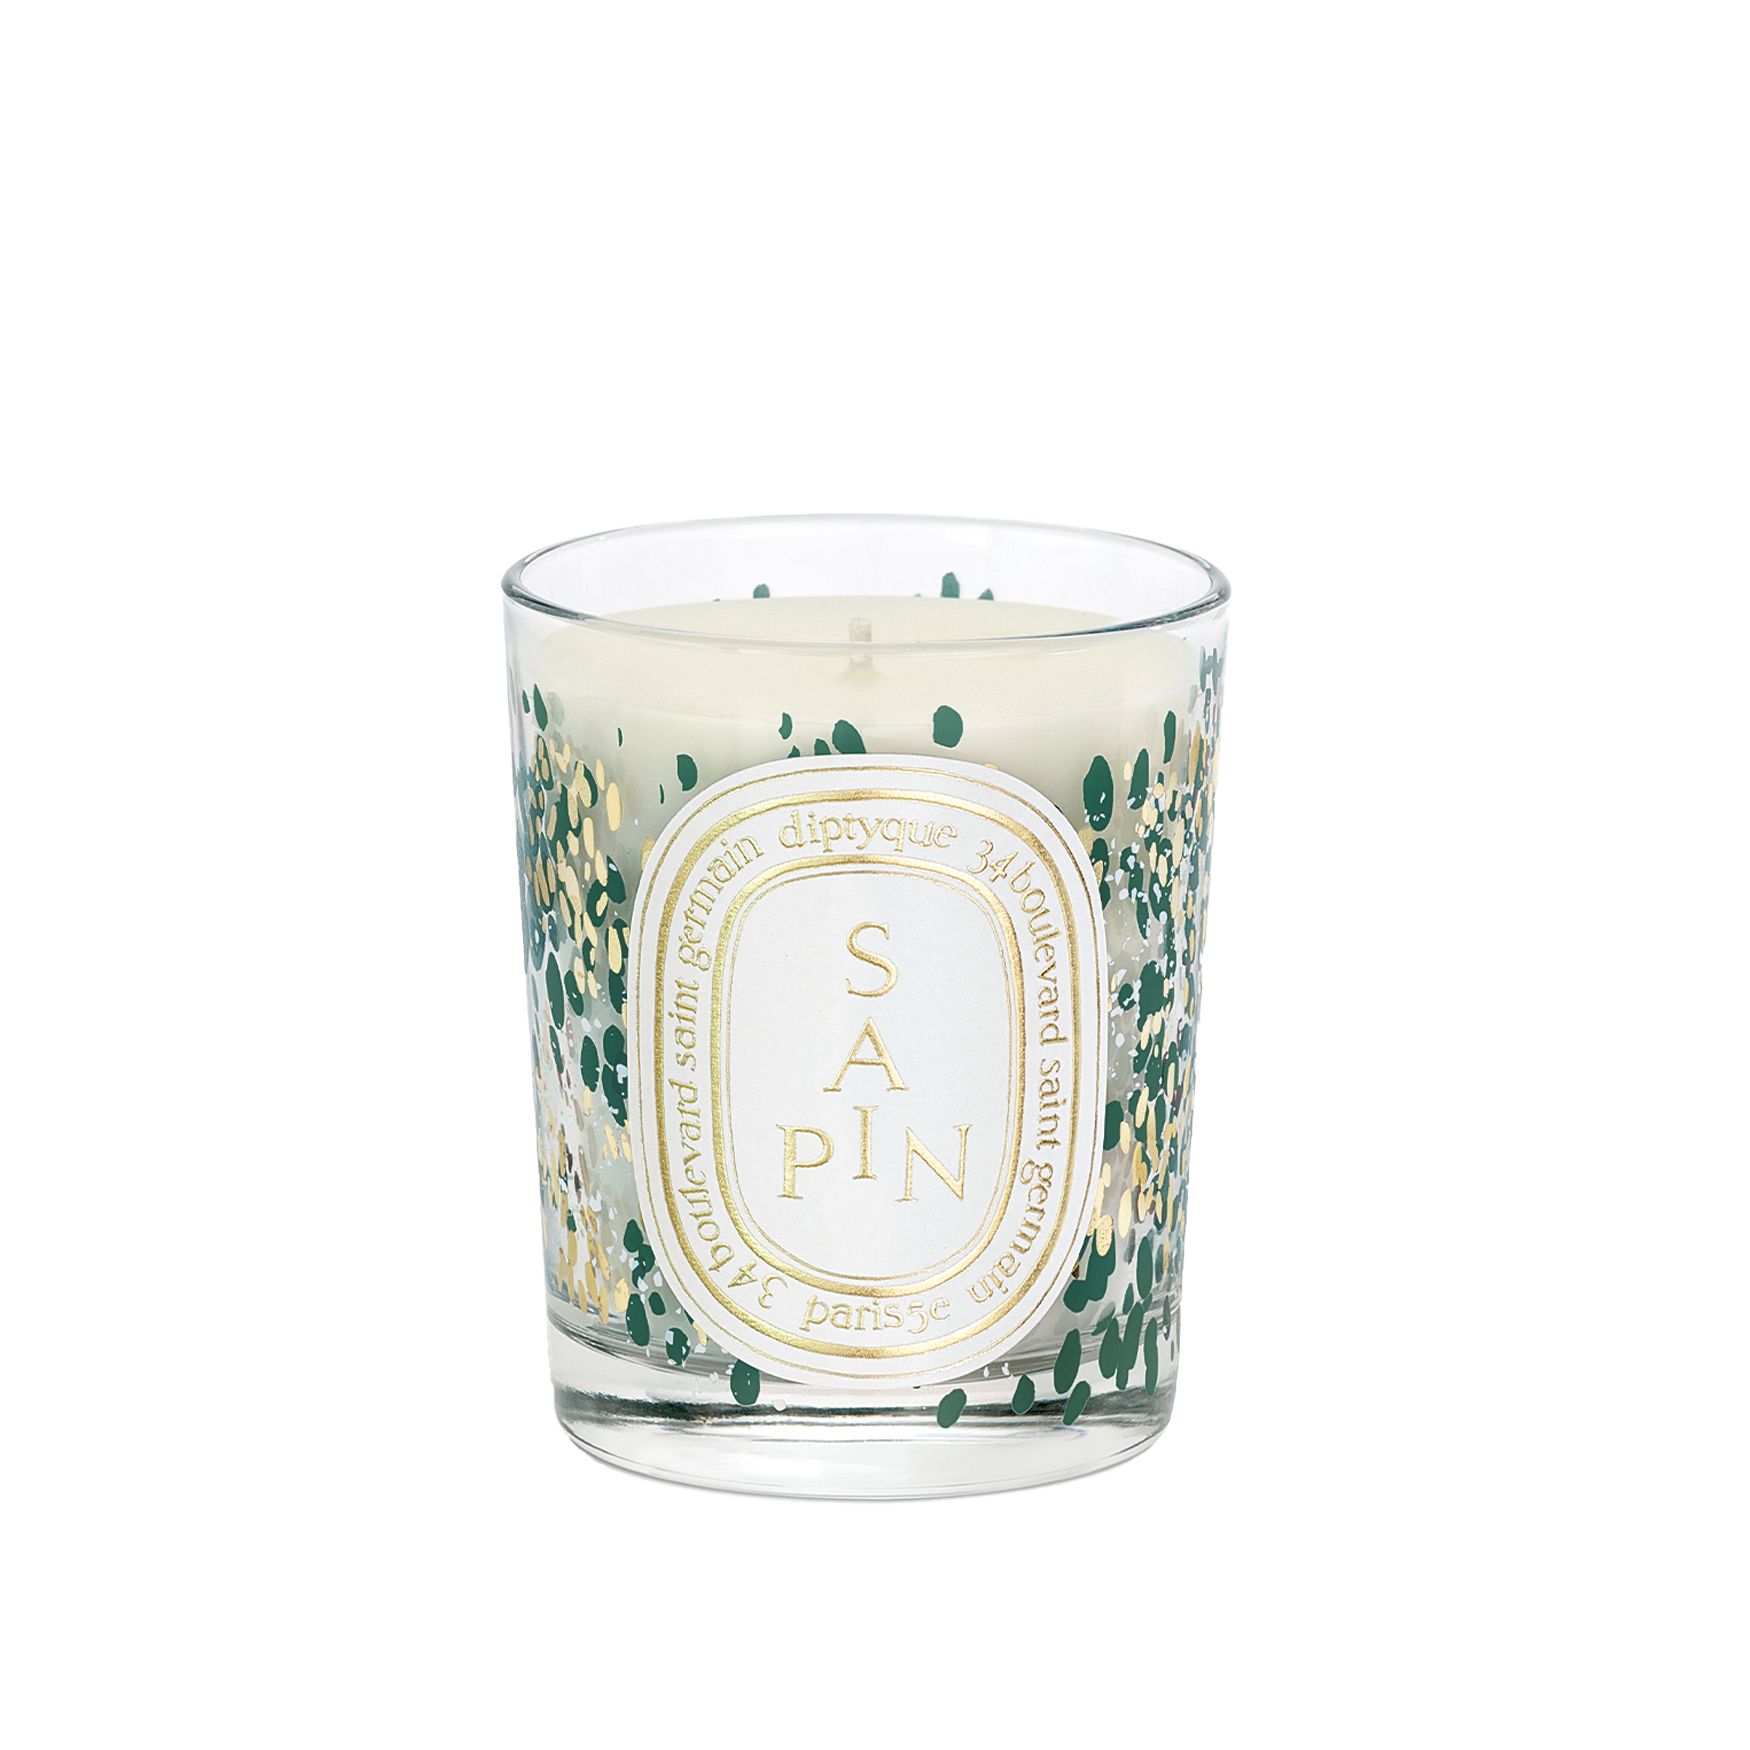 Diptyque

Sapin Scented Candle

70G | Space NK (EU)